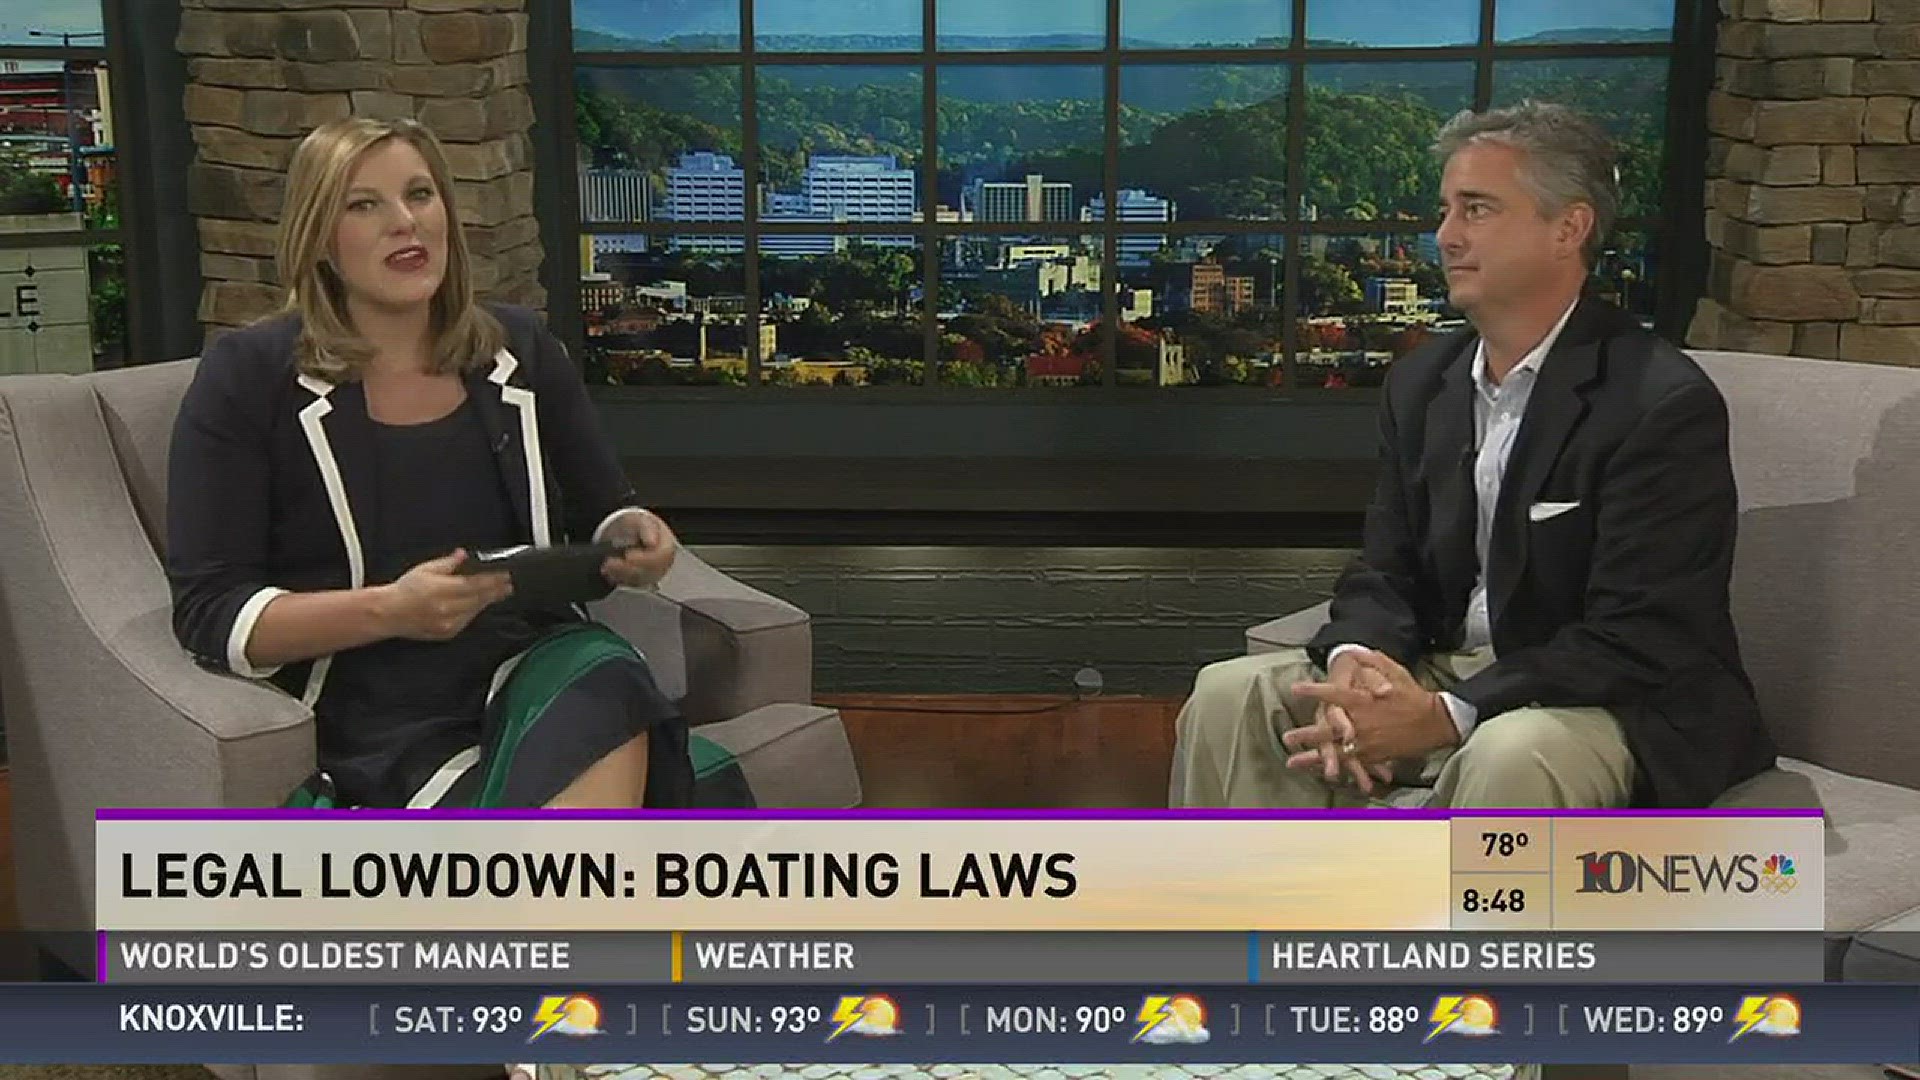 Robbie Pryor from Pryor, Priest & Harber discusses mindfulness of boating laws with summer in full swing.